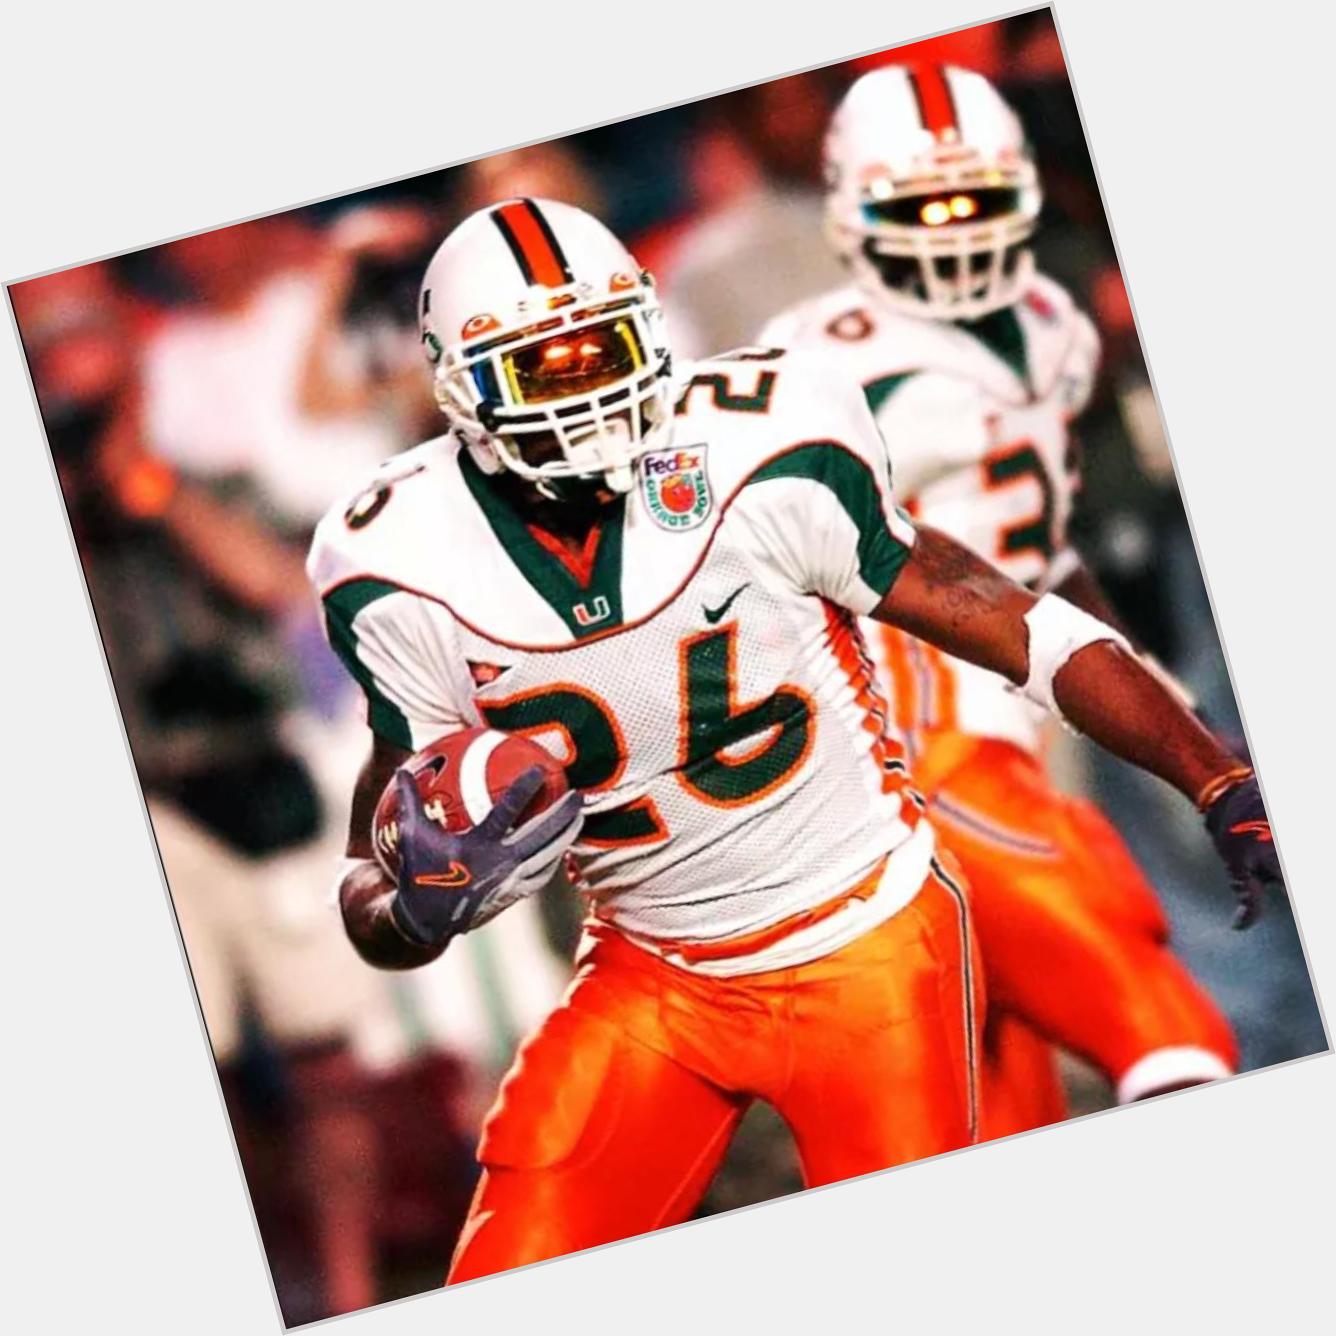 Happy birthday to the Great Sean Taylor  